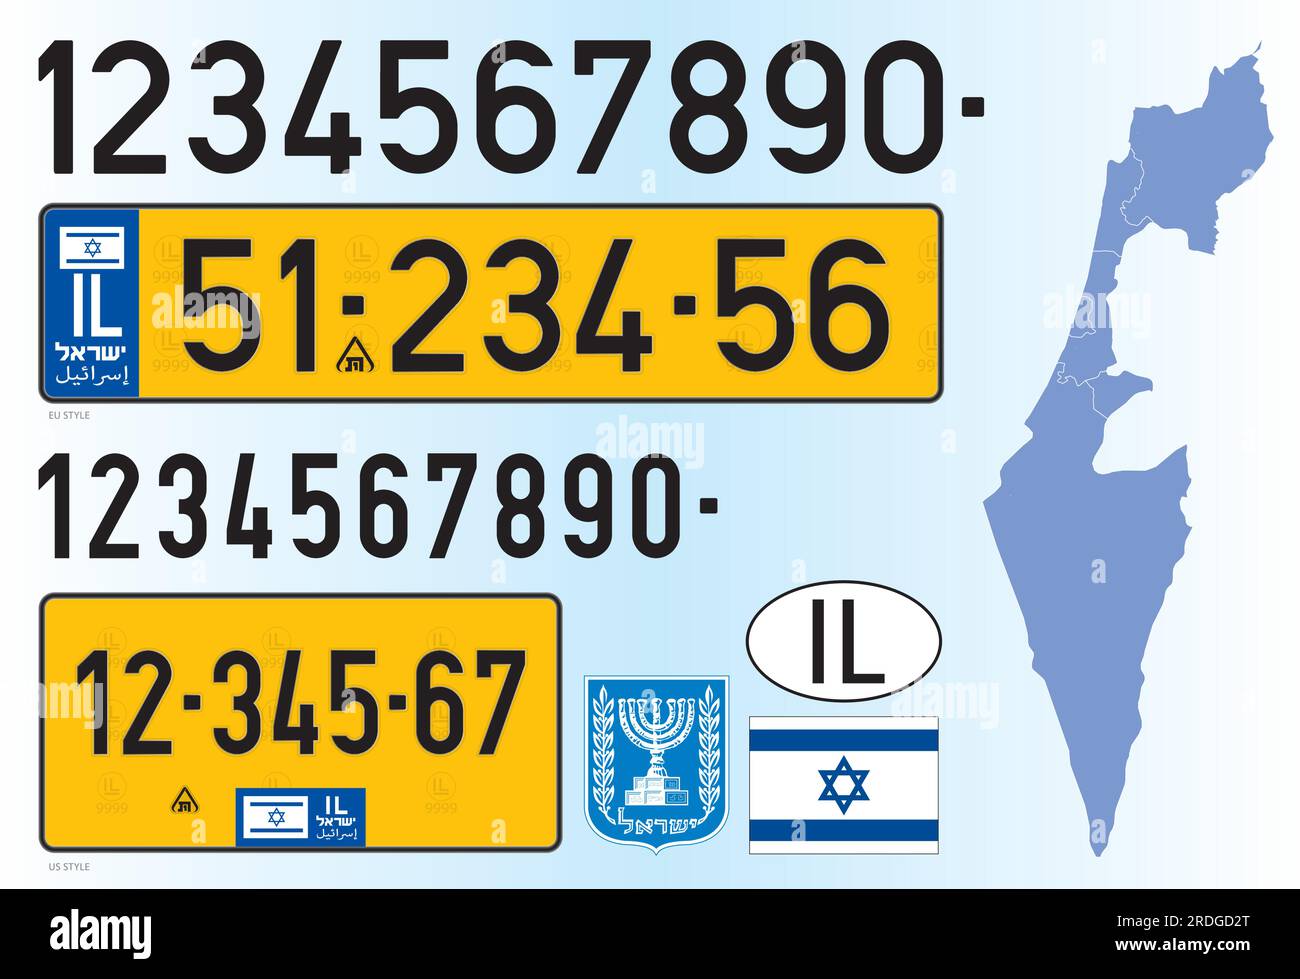 Israel car license plate pattern, numbers and symbols, vector illustration, Israel, middle east Stock Vector